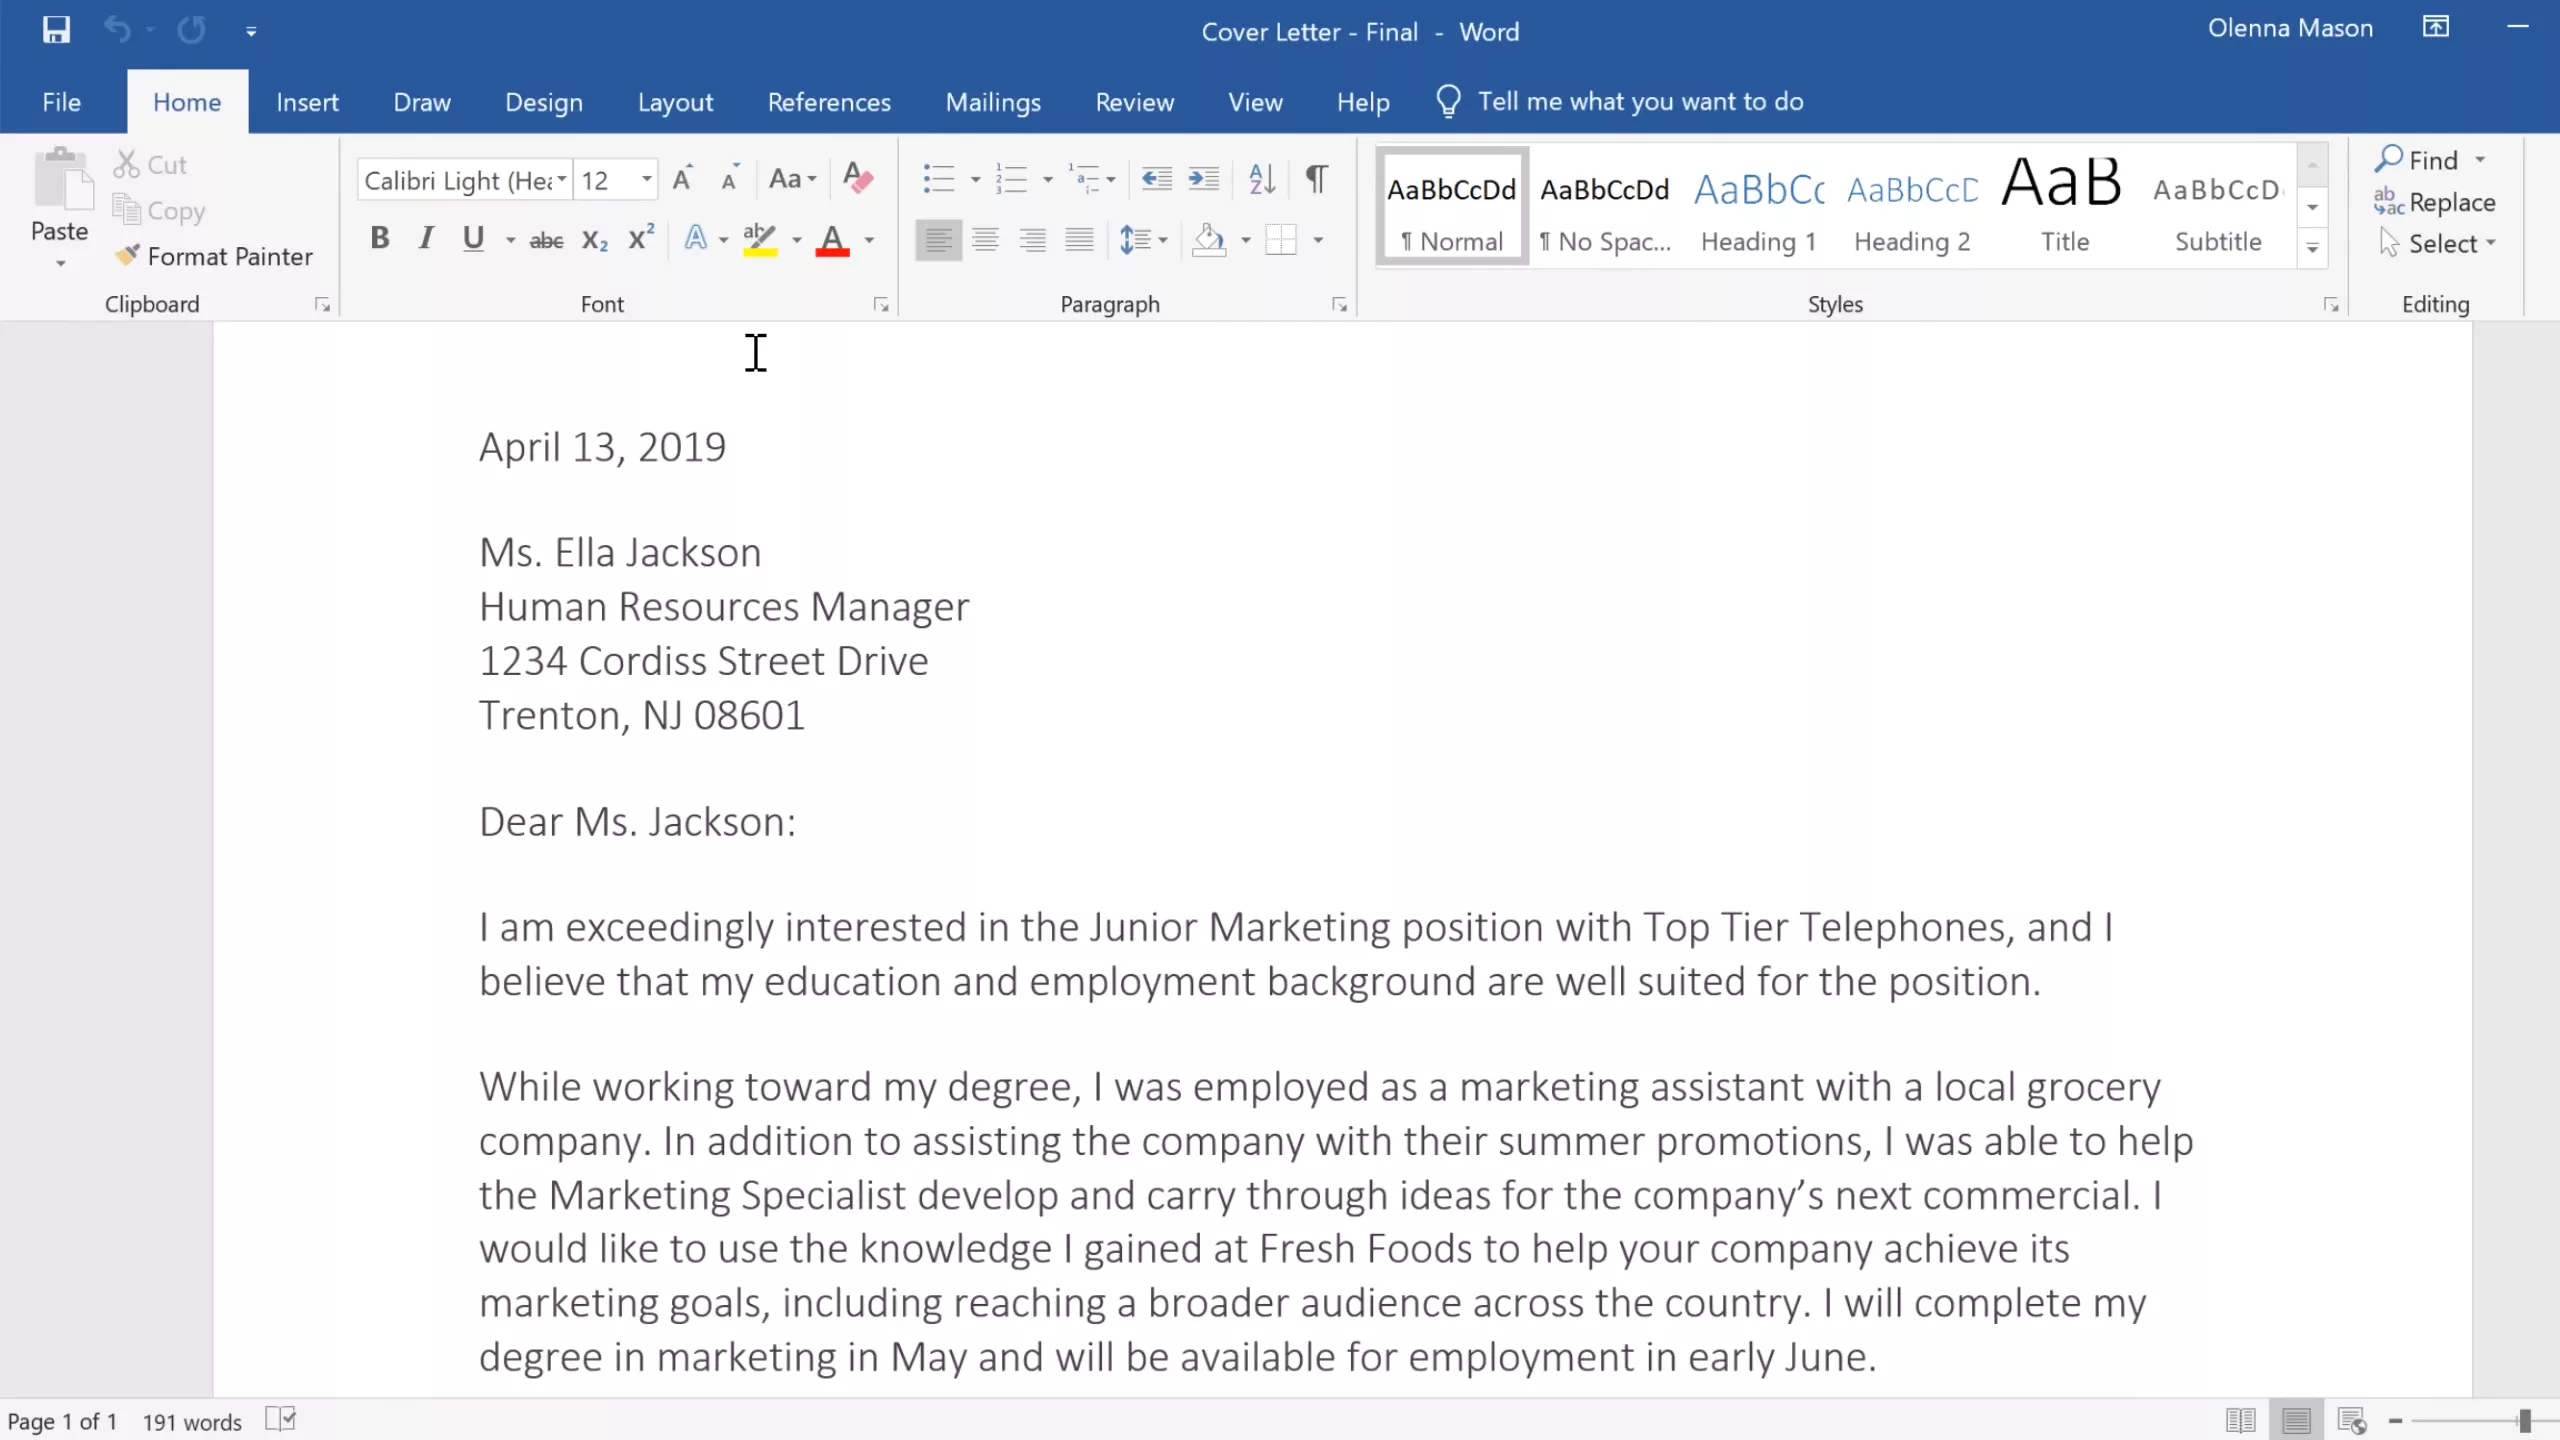 Get Microsoft Office for $29 as a one-time purchase